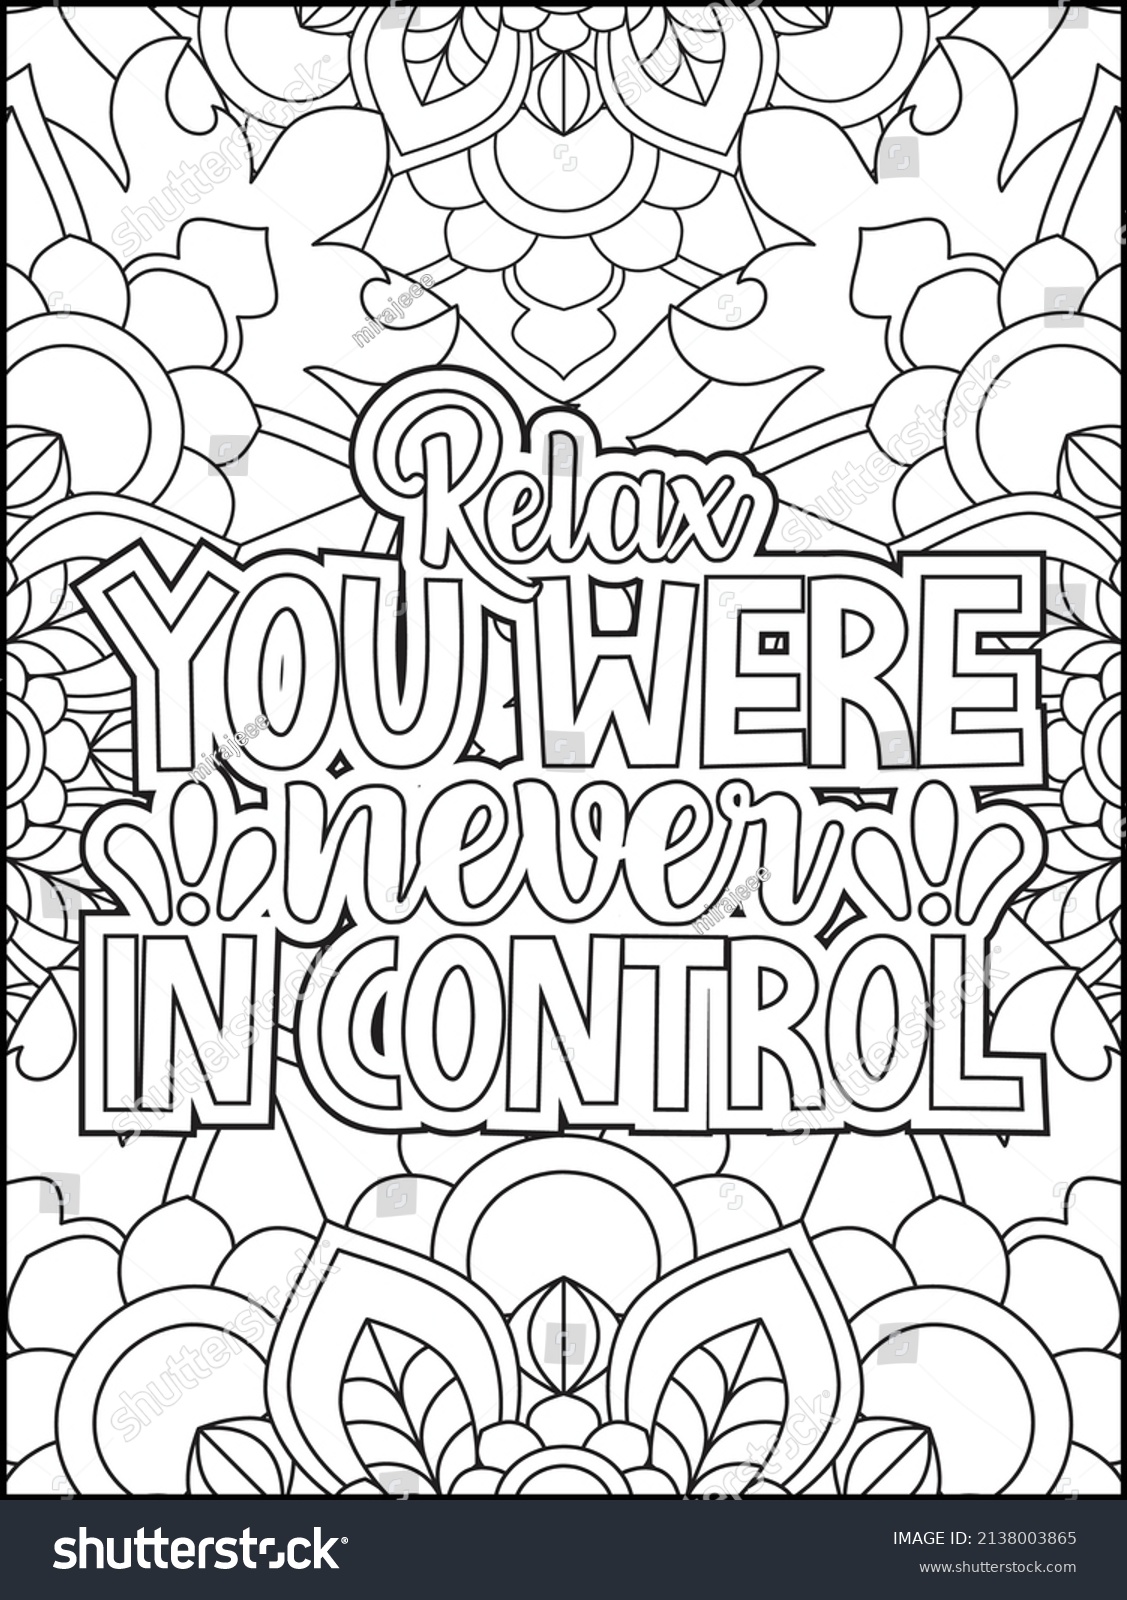 Motivational Quotes Coloring Page Inspirational Quotes Stock Vector ...